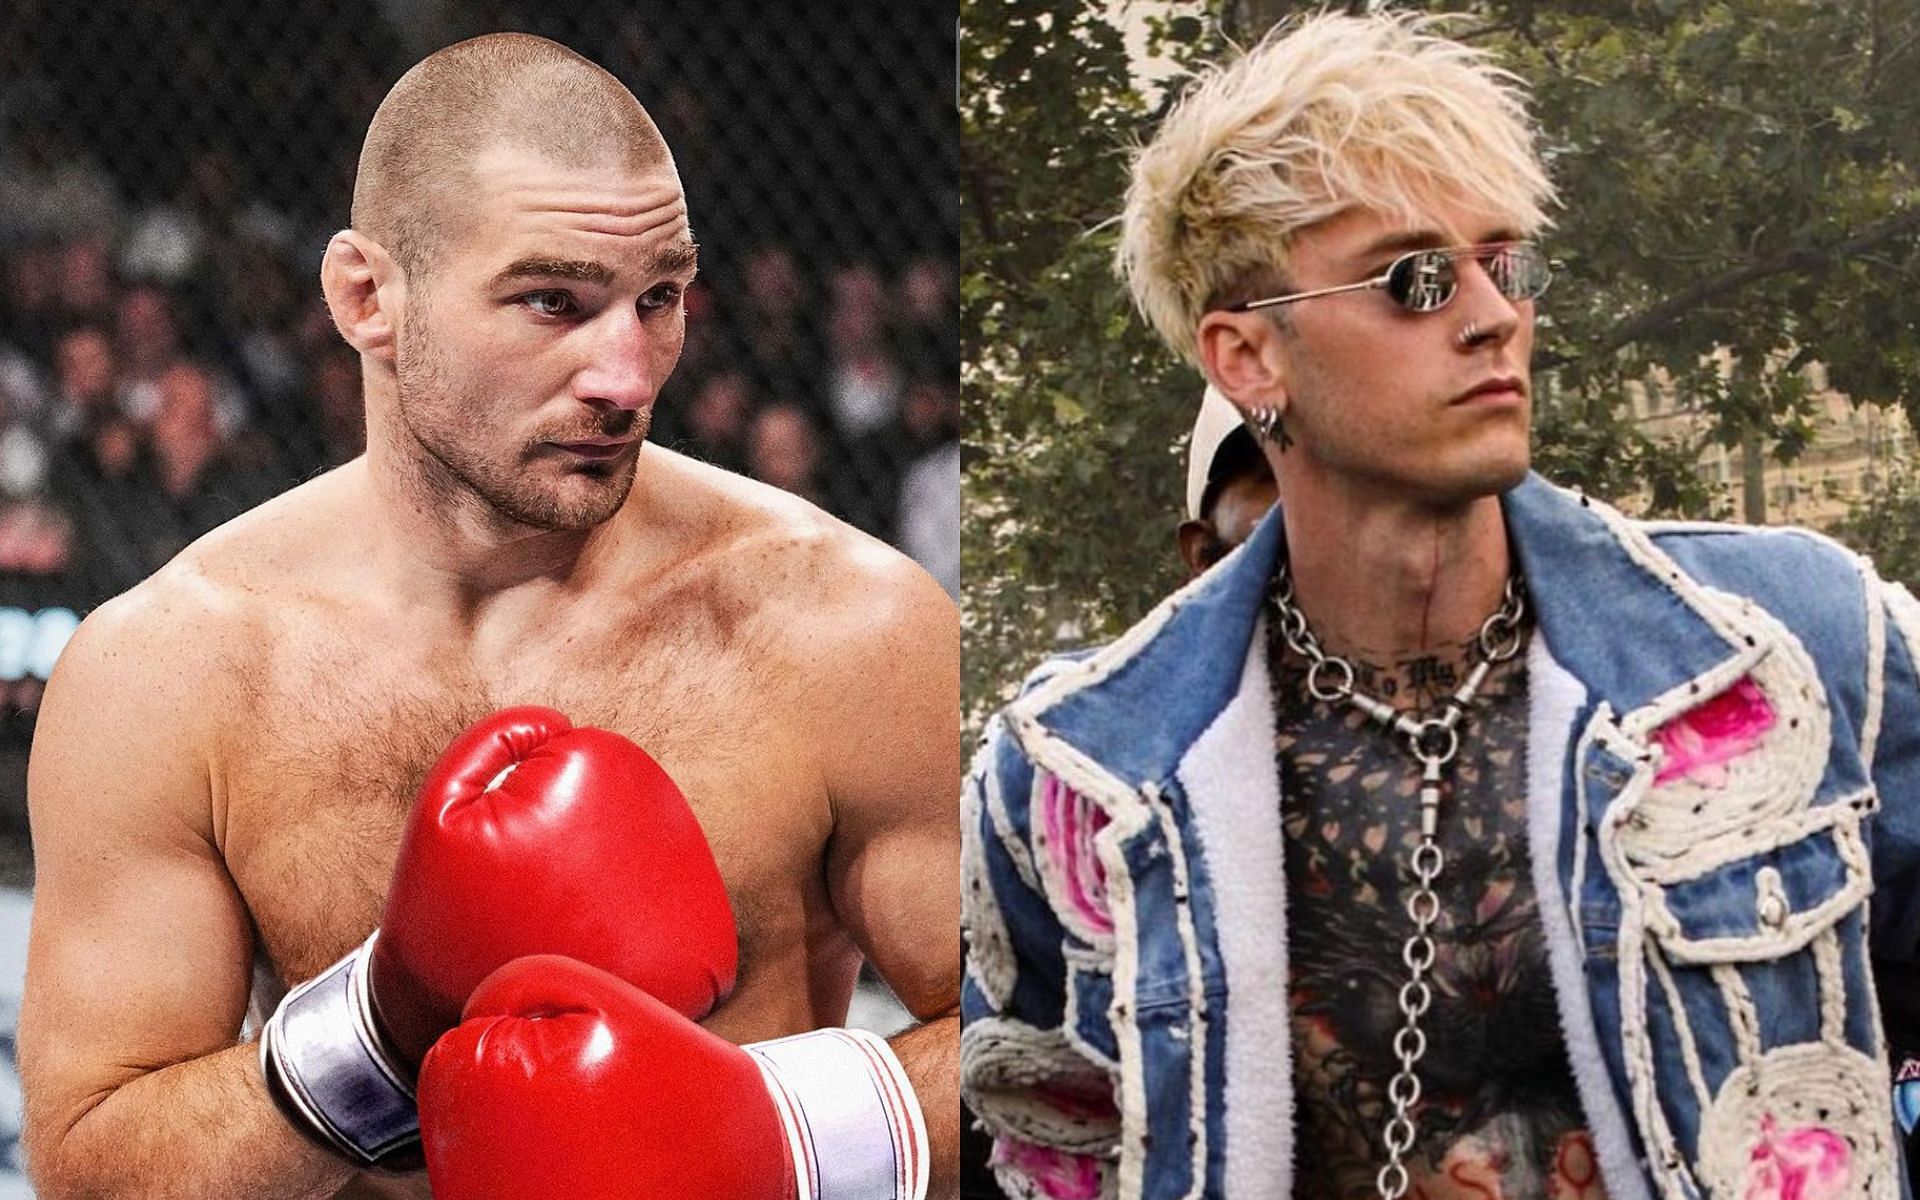 Sean Strickland (left) gets into an altercation with Machine Gun Kelly (right) [Image courtesy @stricklandmma and @machinegunkelly on Instagram]